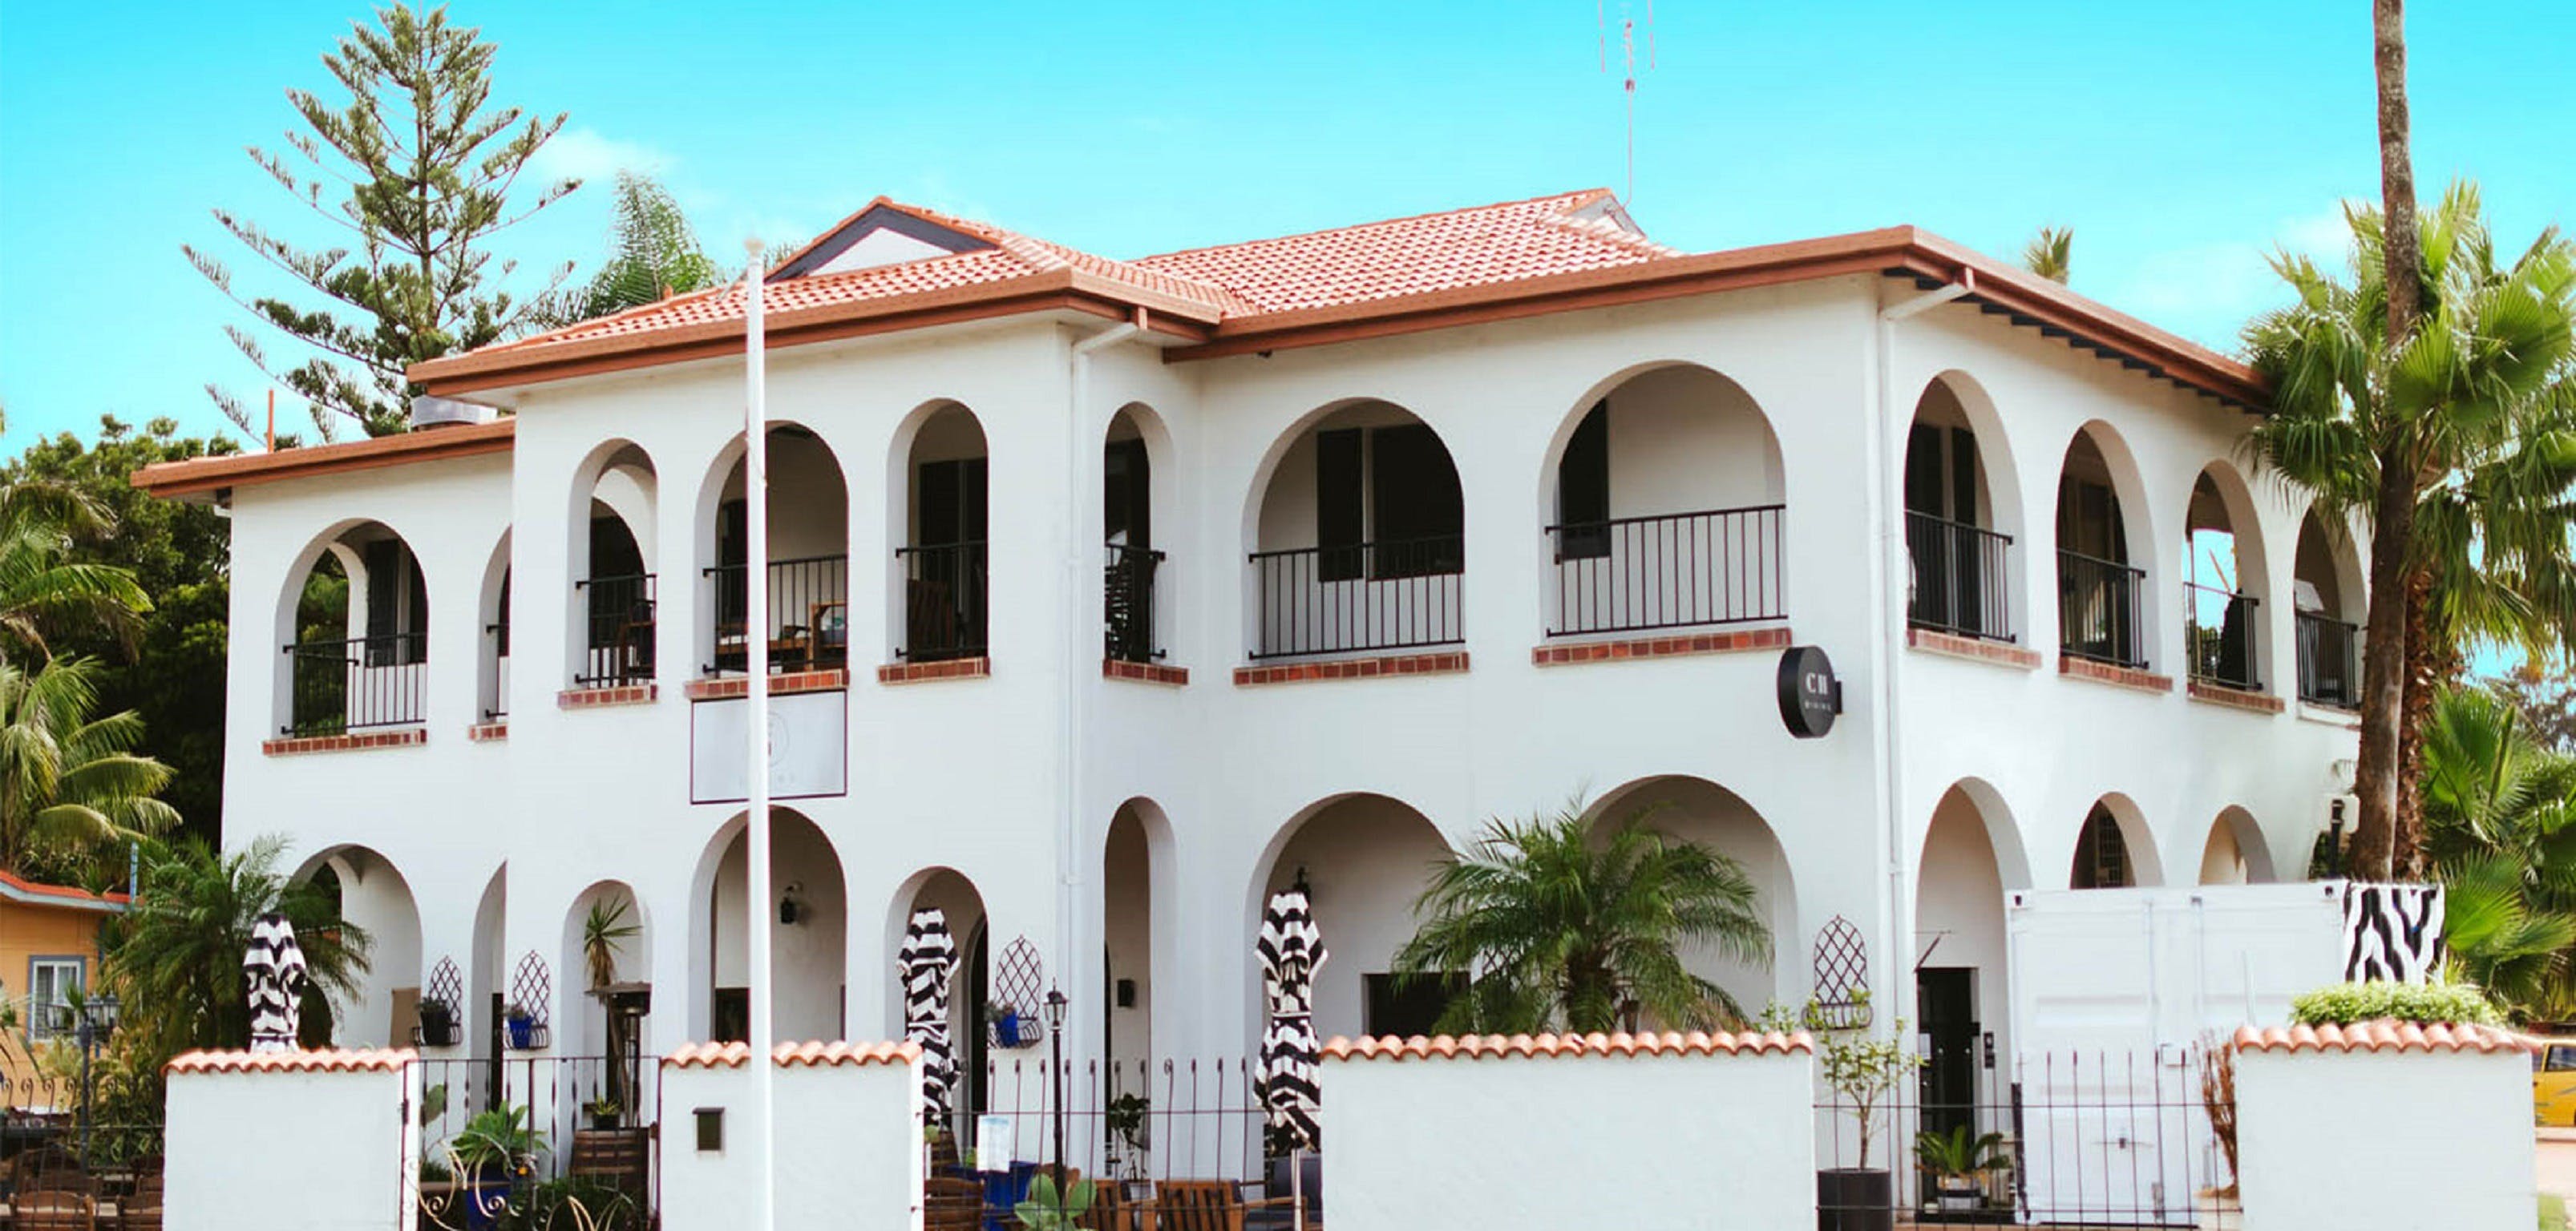 The Med Crescent Head - Accommodation Resorts